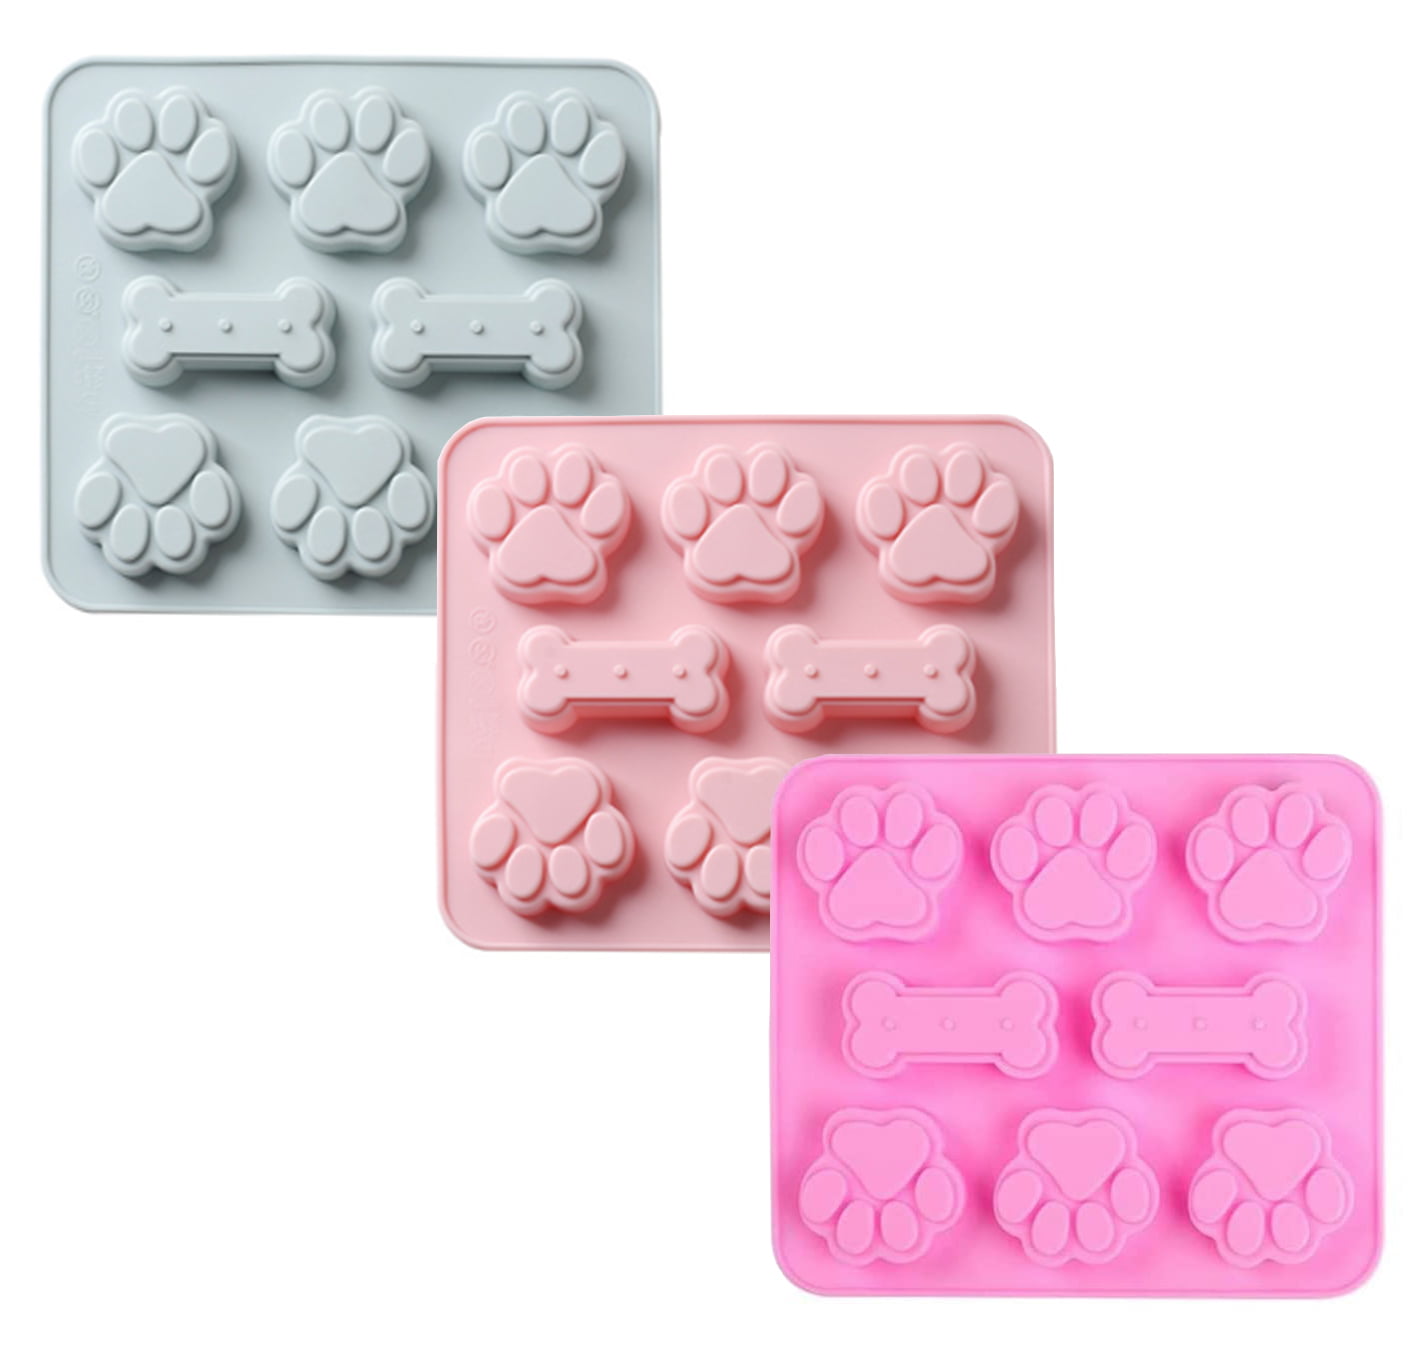 Mini Silicone Mold Dog Food Chocolate Candy Ice Gelatin Butter Mould Tray USA